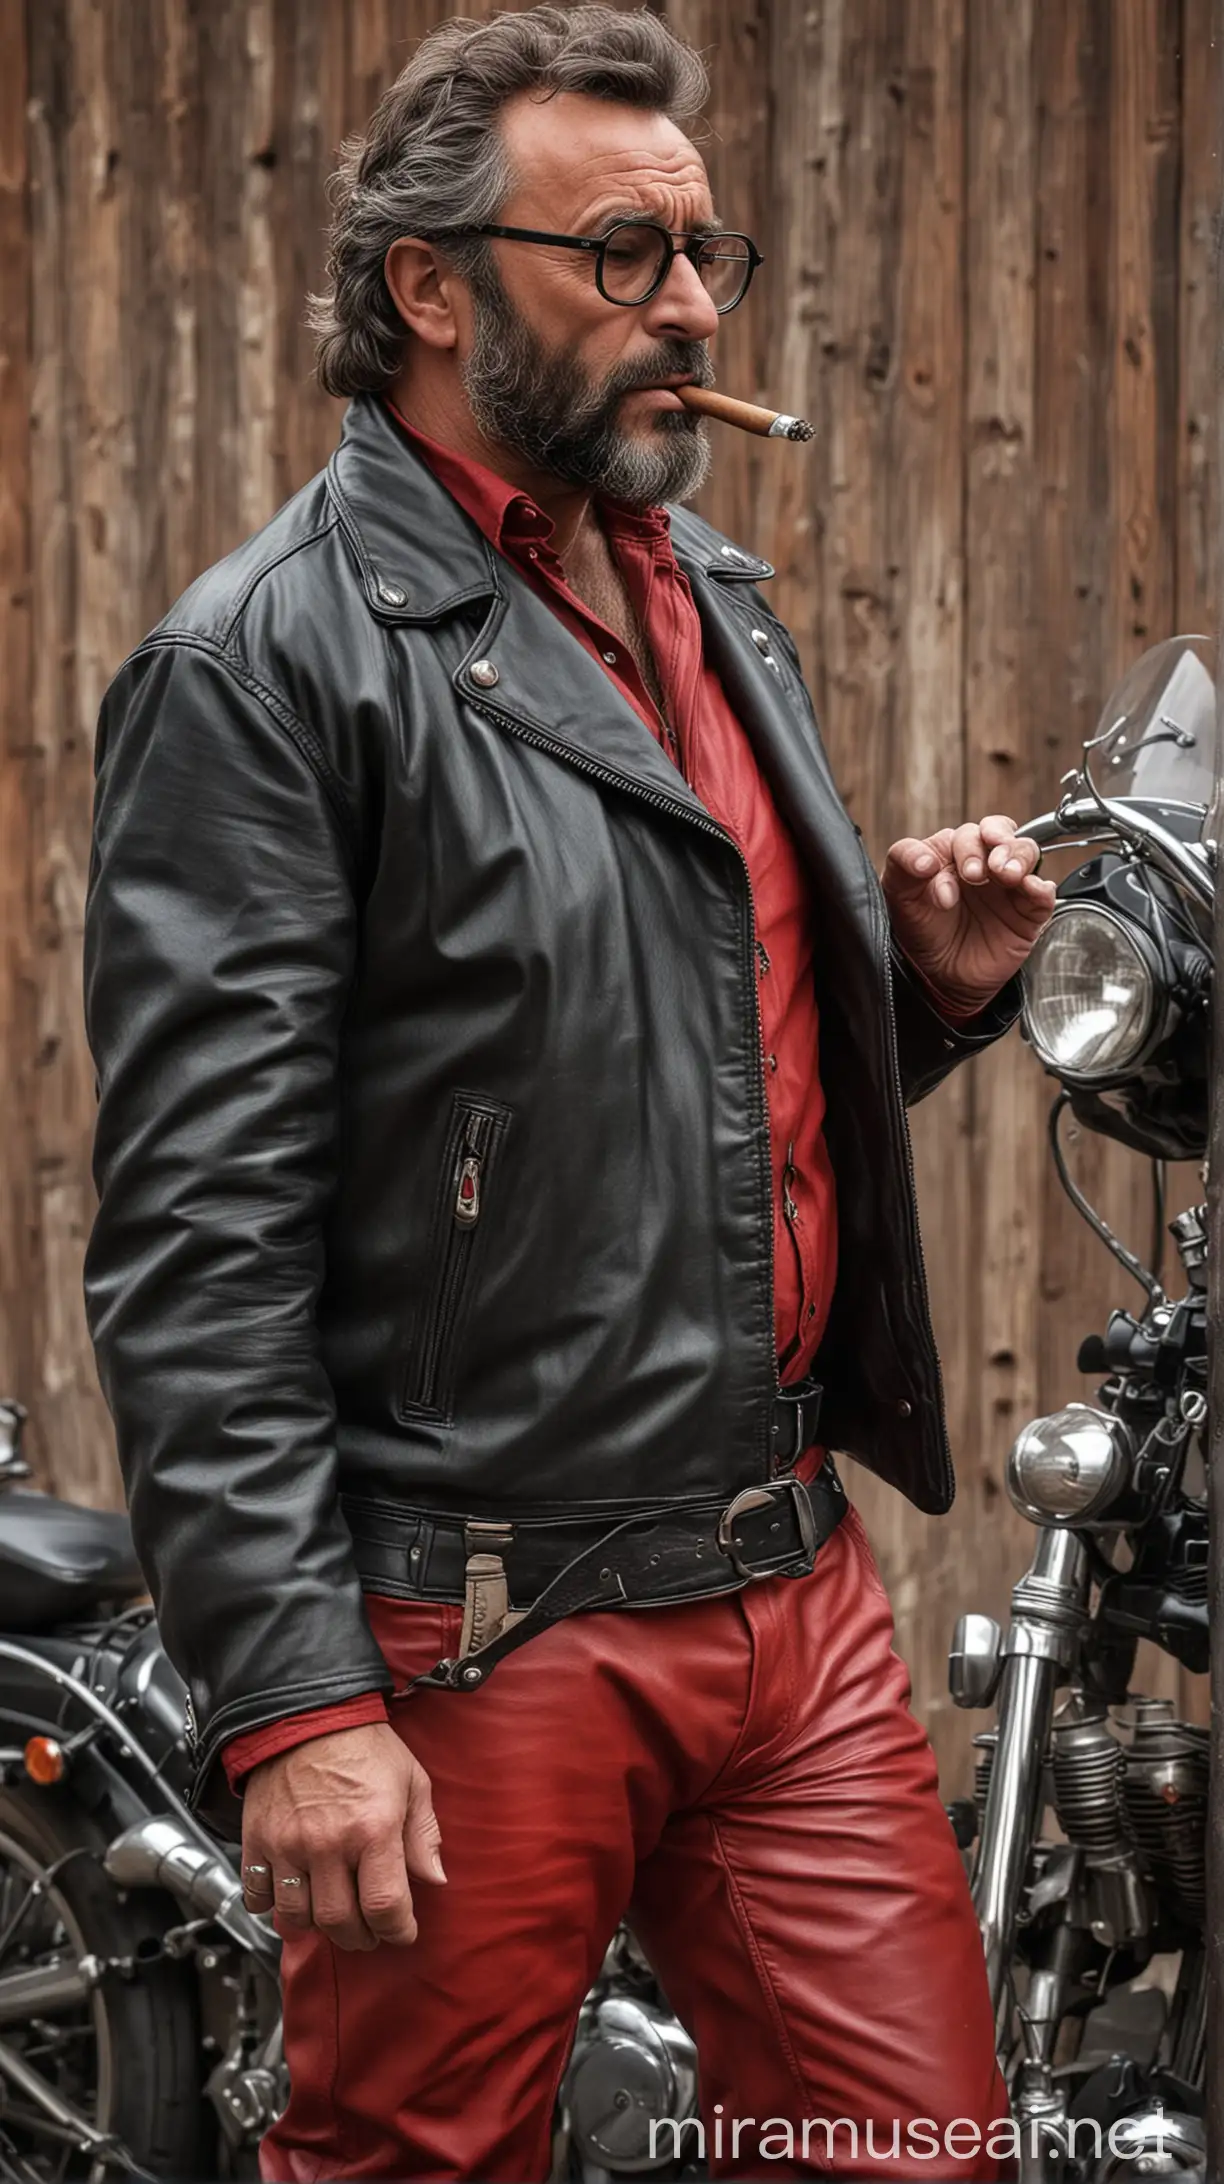 Masculine Biker Peter Falk Smoking Cigar in Leather Jacket and Red Pants